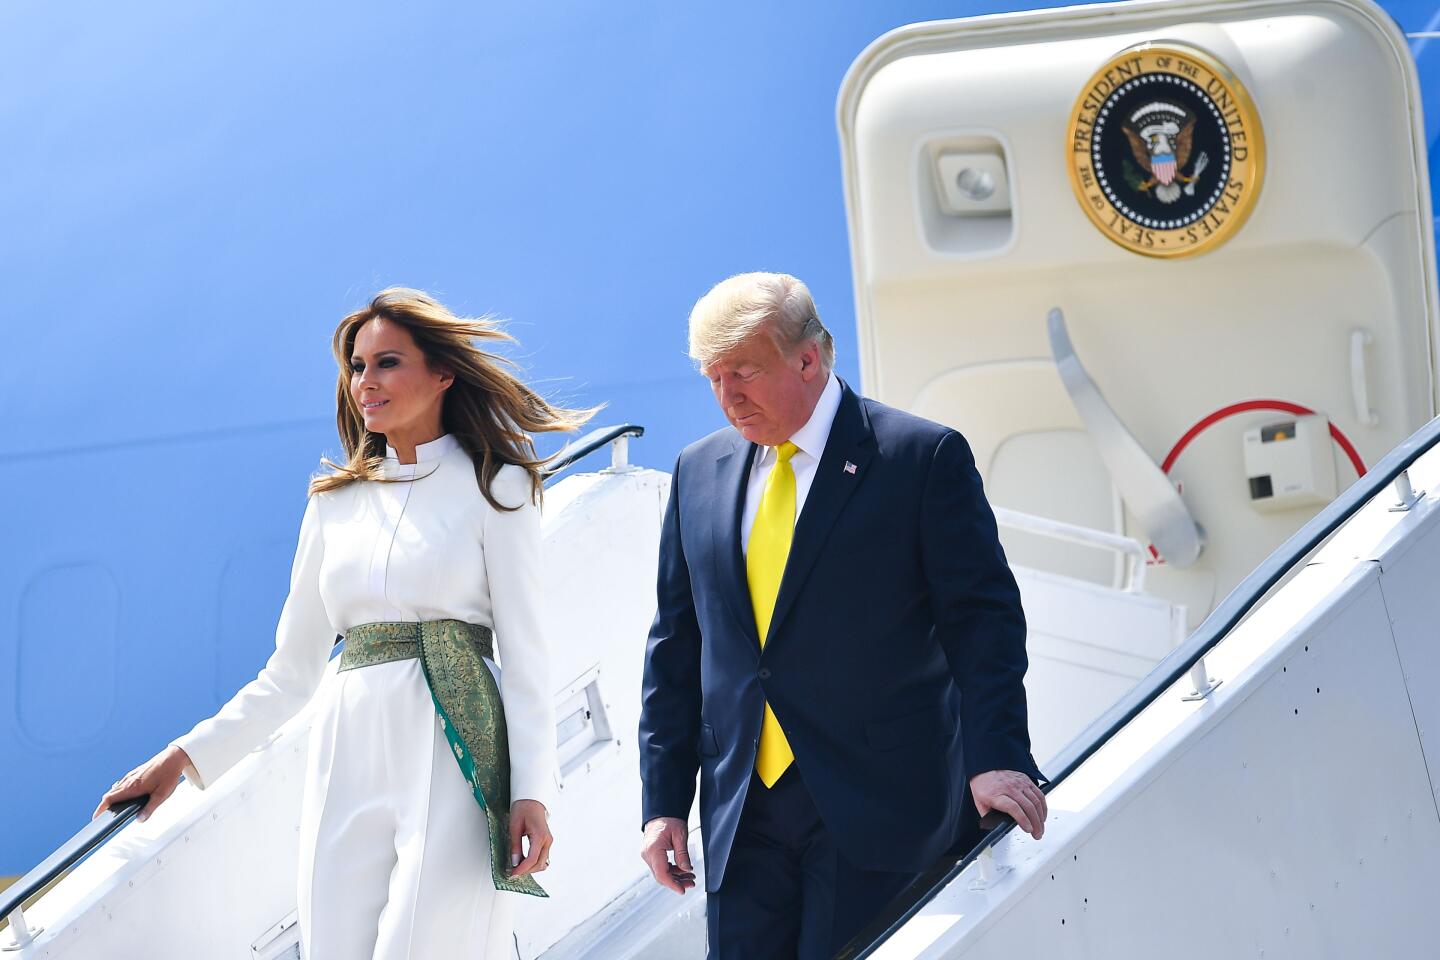 President Trump and First Lady Melania Trump disembark from Air Force One upon their arrival in Ahmedabad, India, on Monday. This is the first time a sitting American president has visited Ahmedabad, a major industrial city and the source of a large diaspora in the U.S.